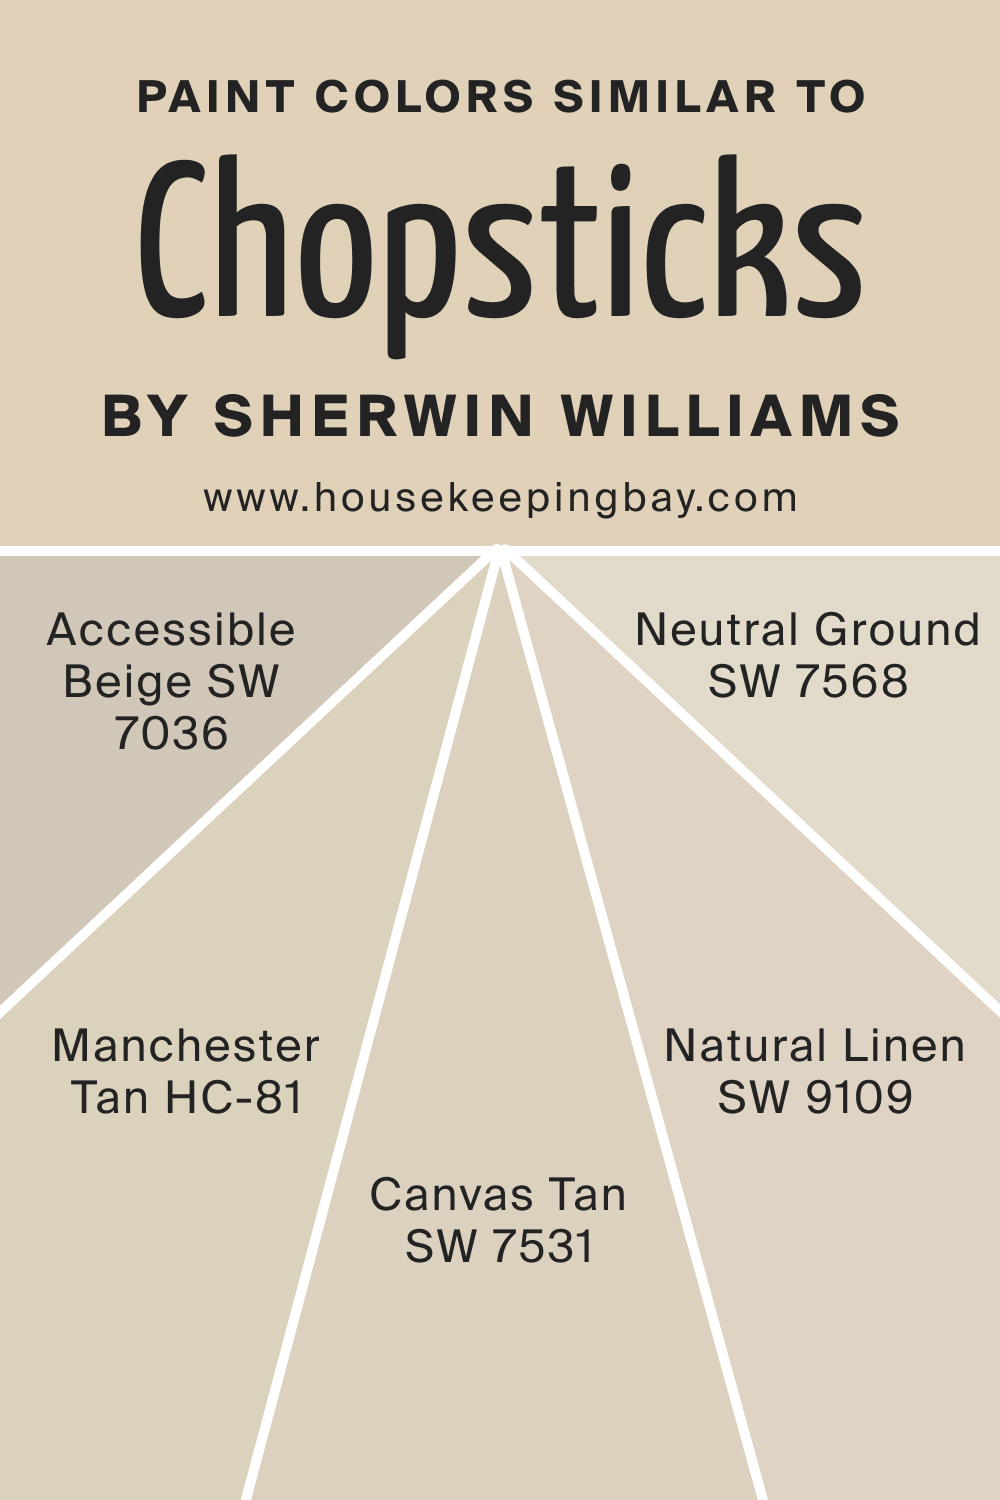 Paint Colors Similar to SW Chopsticks by Sherwin Williams